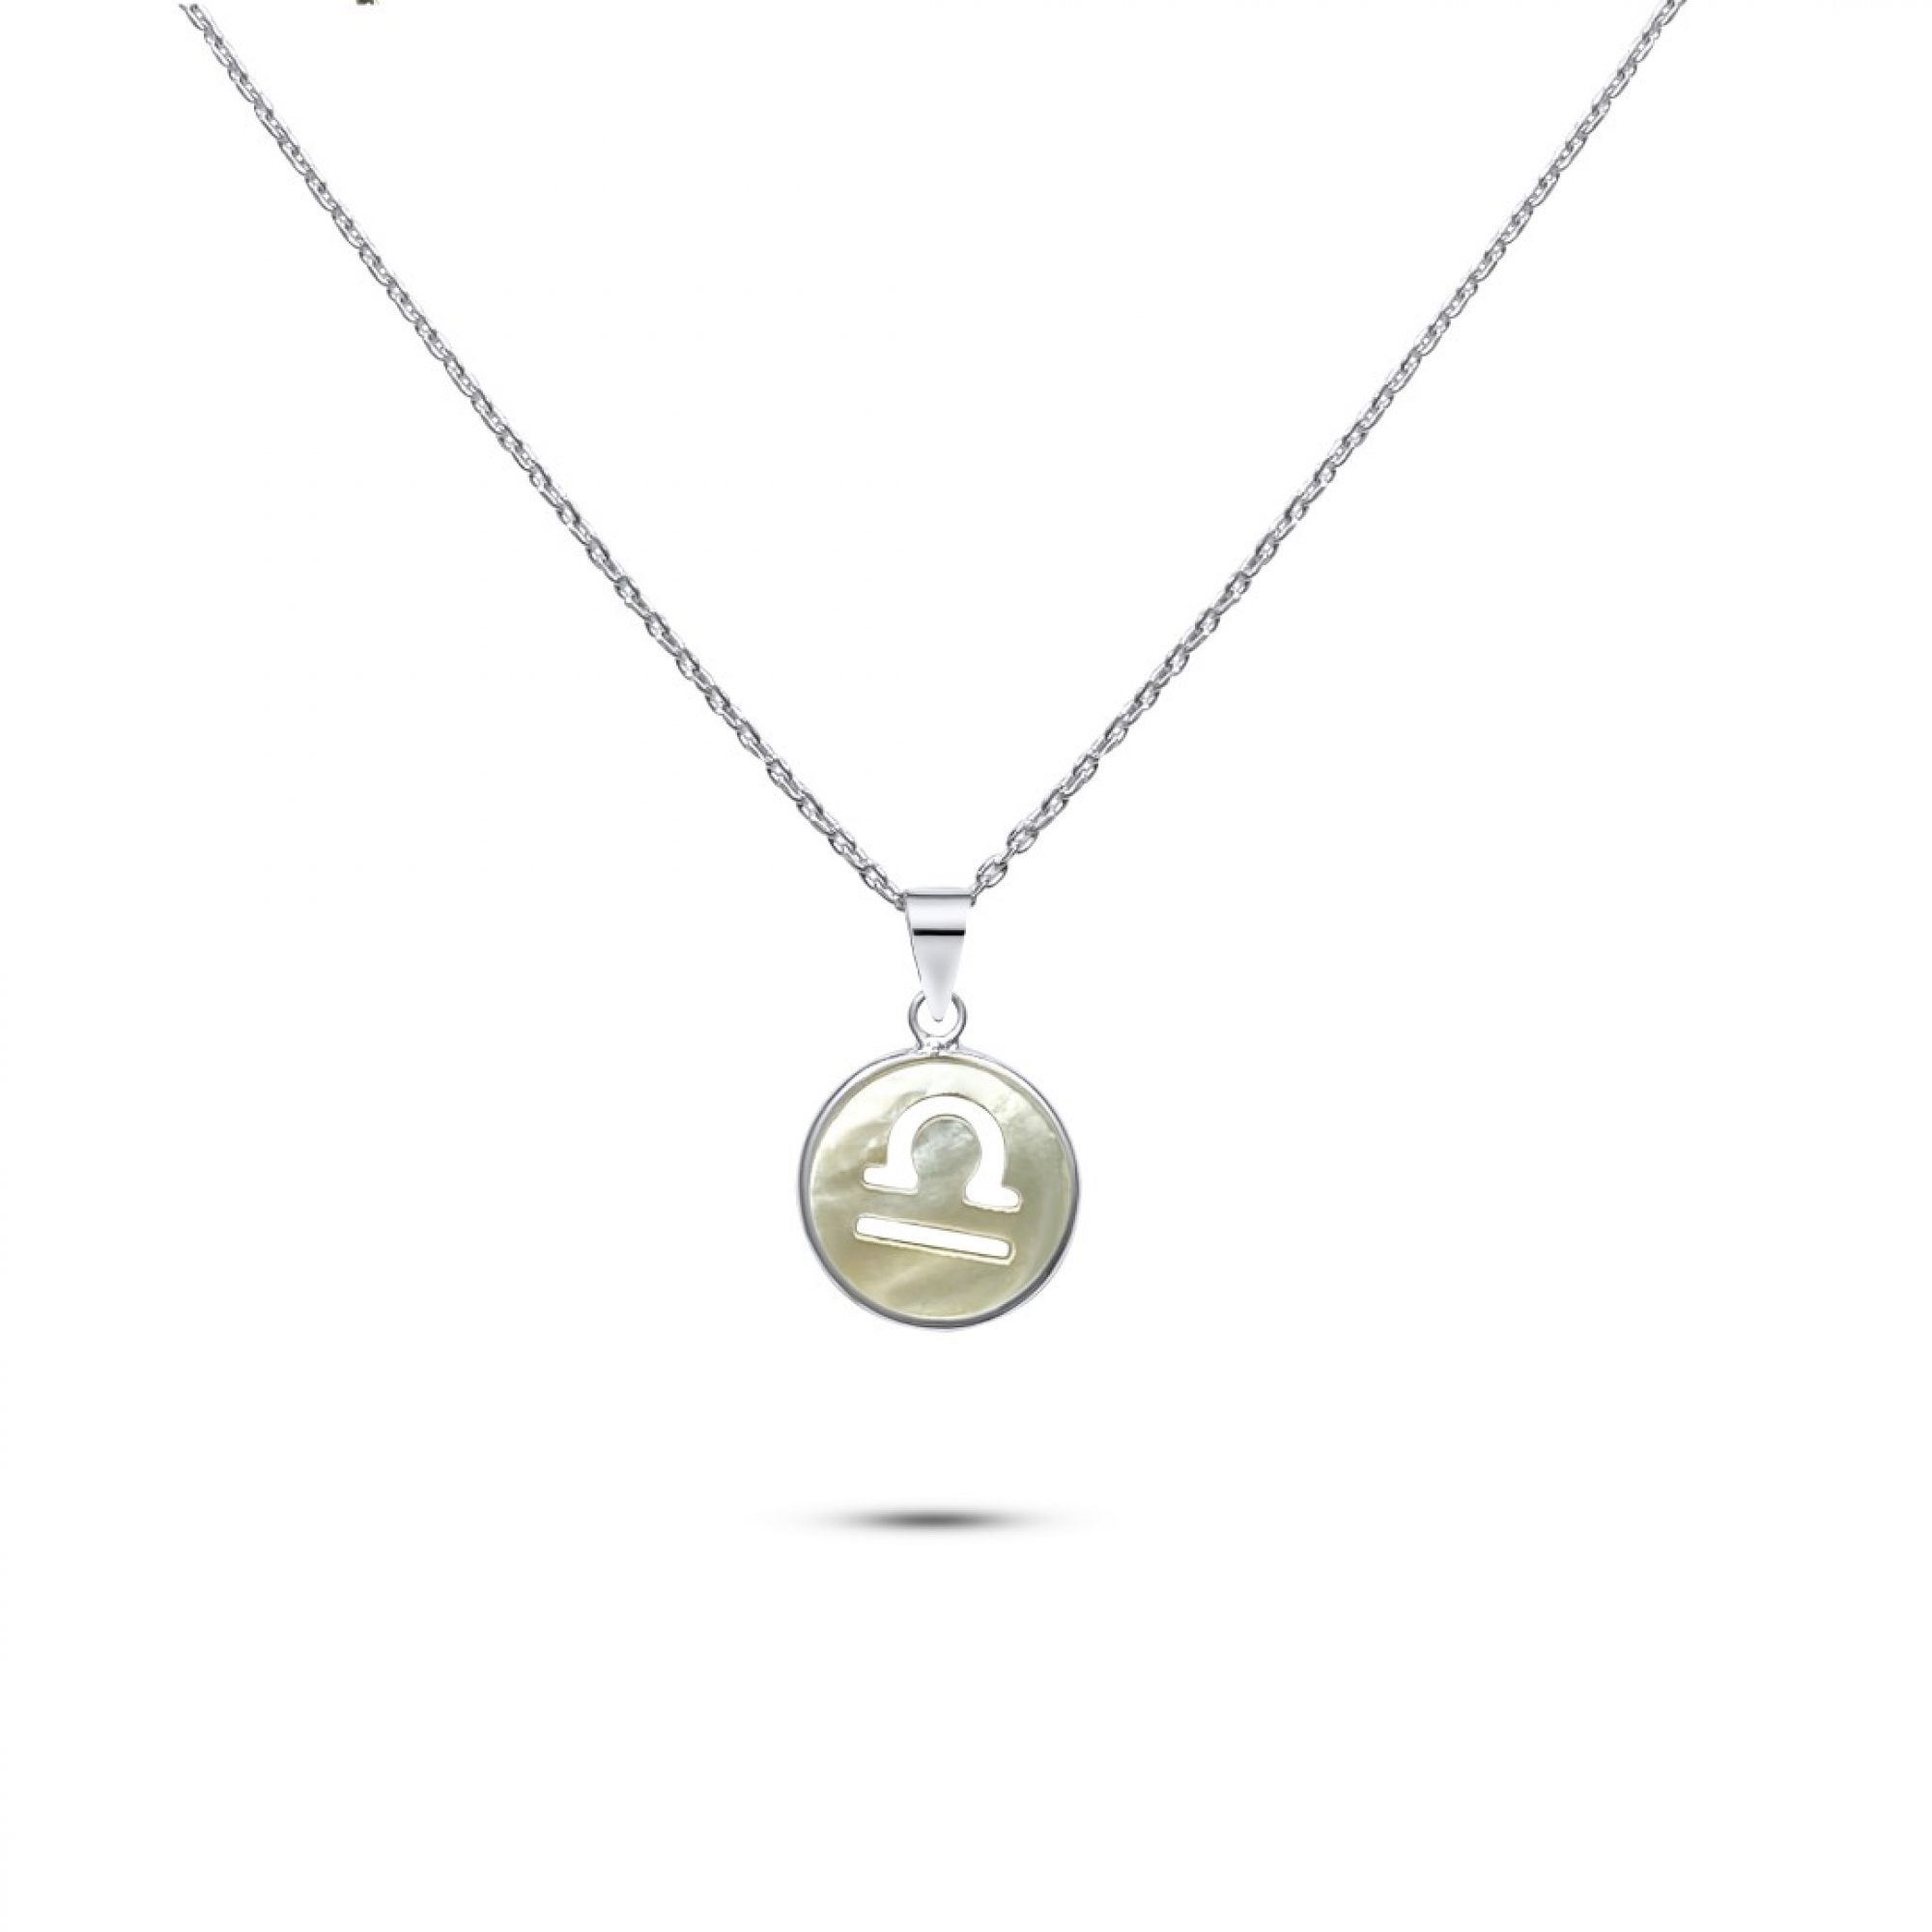 Libra sign necklace with mother of pearl